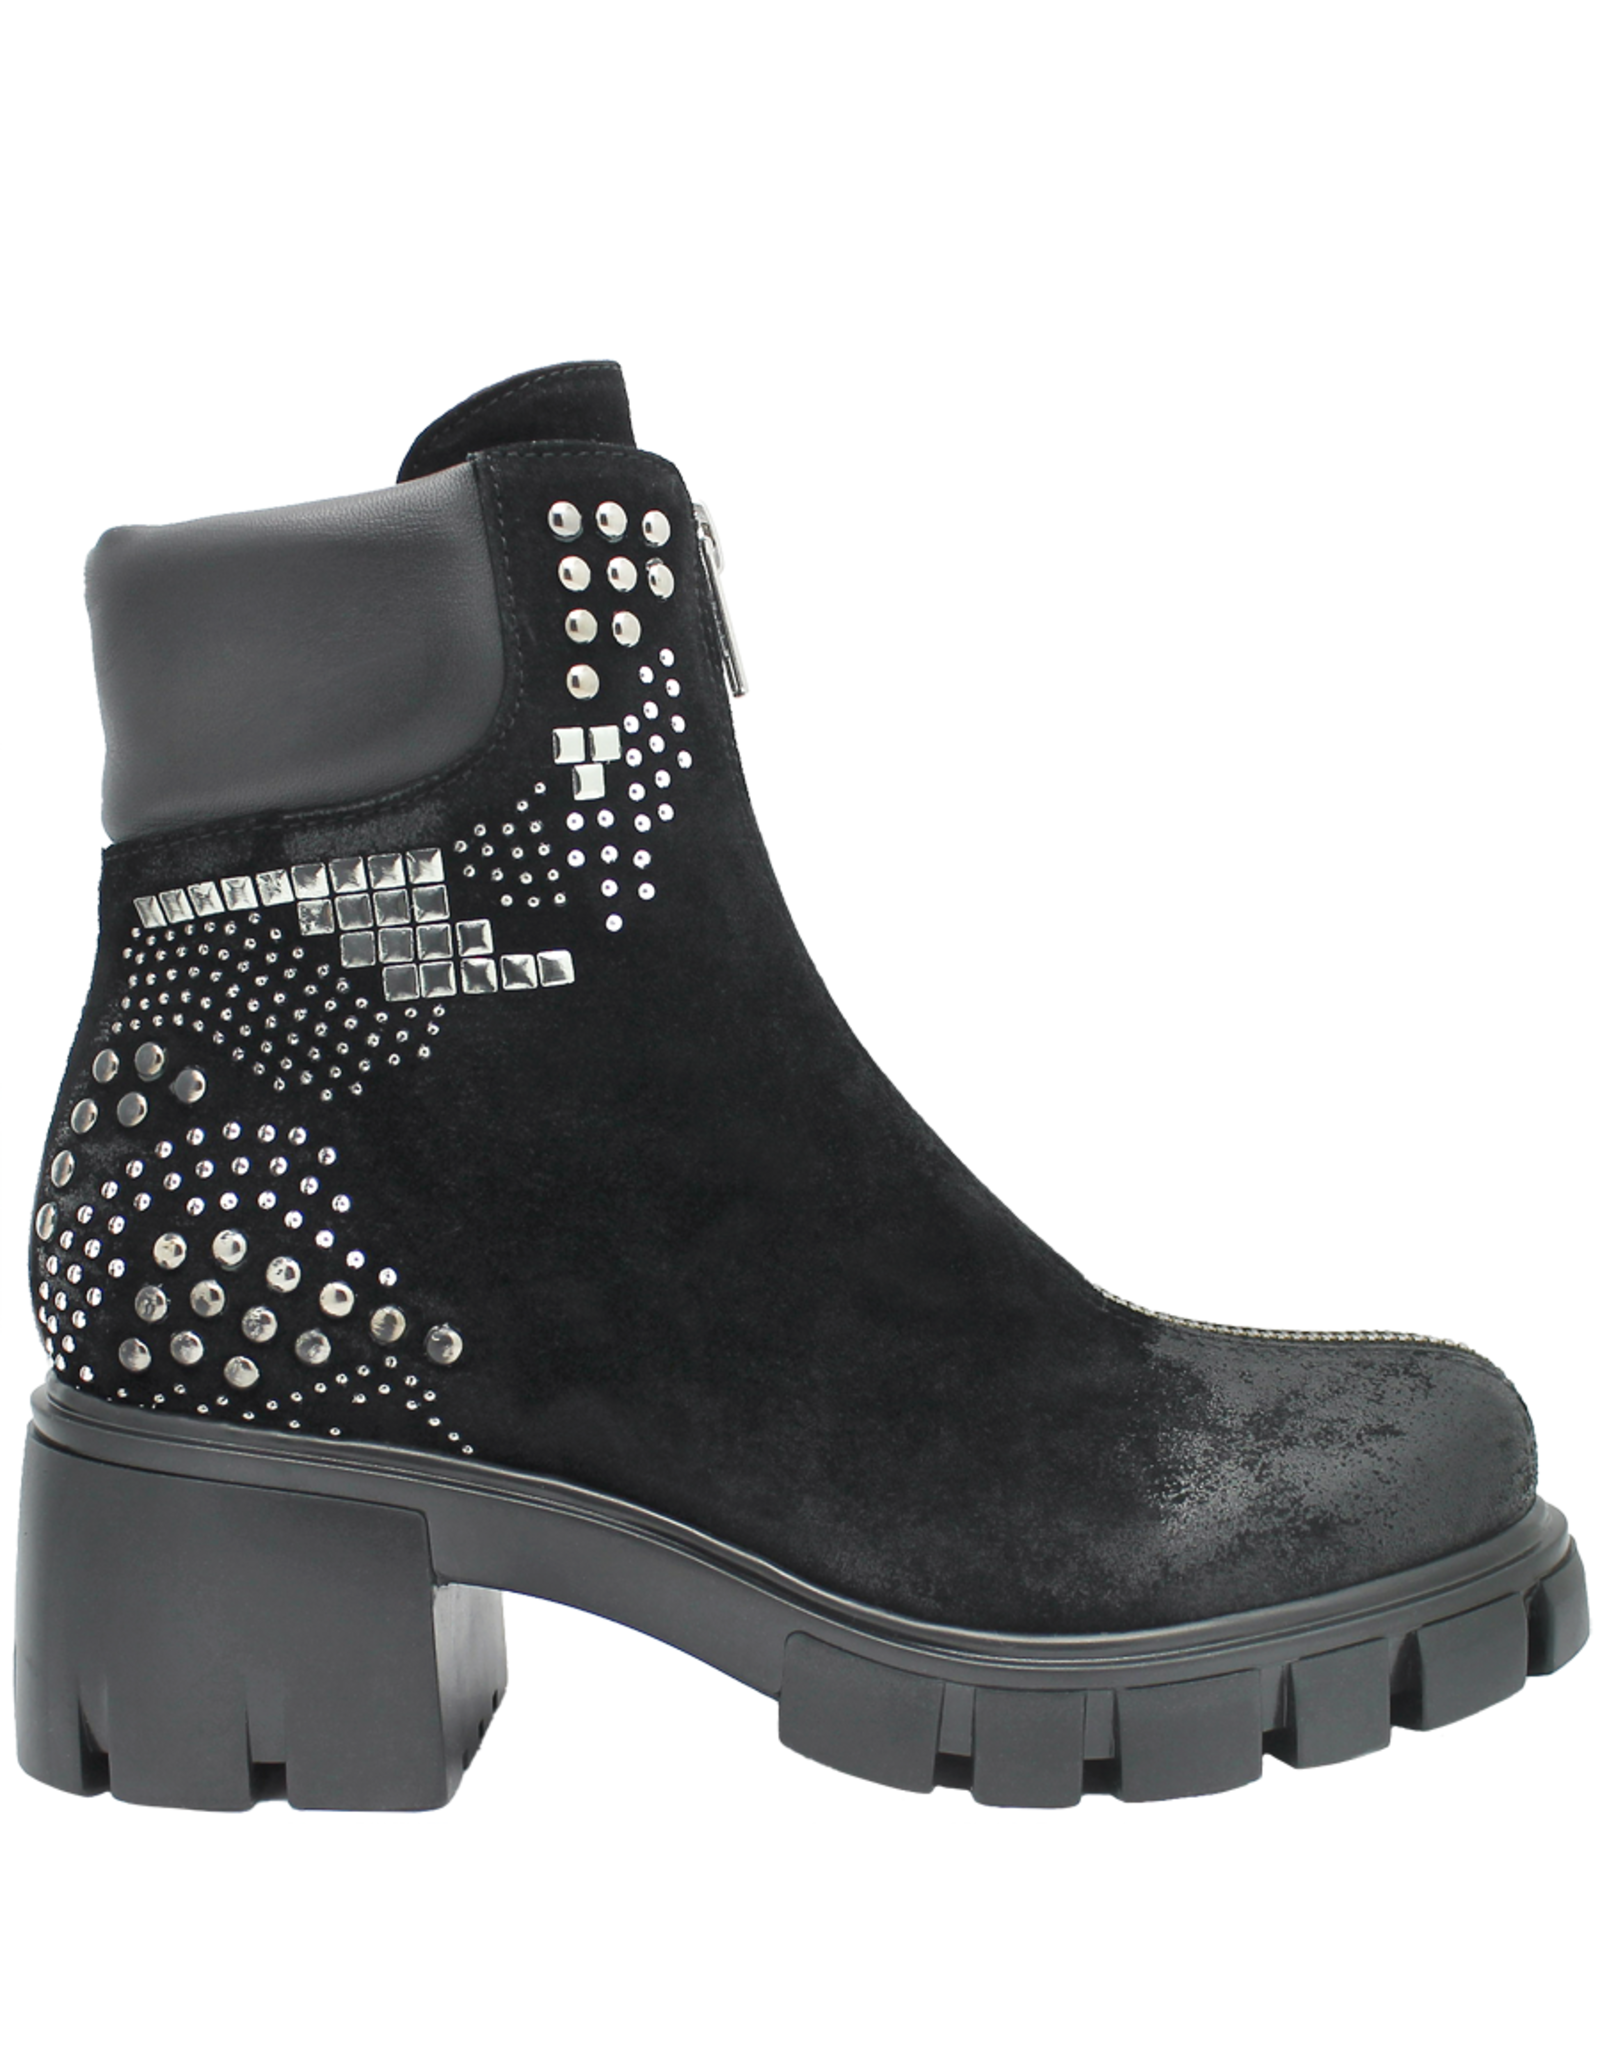 Now Now N42E Black Suede Top Zipper Tread Sole With Stud Detail 8340